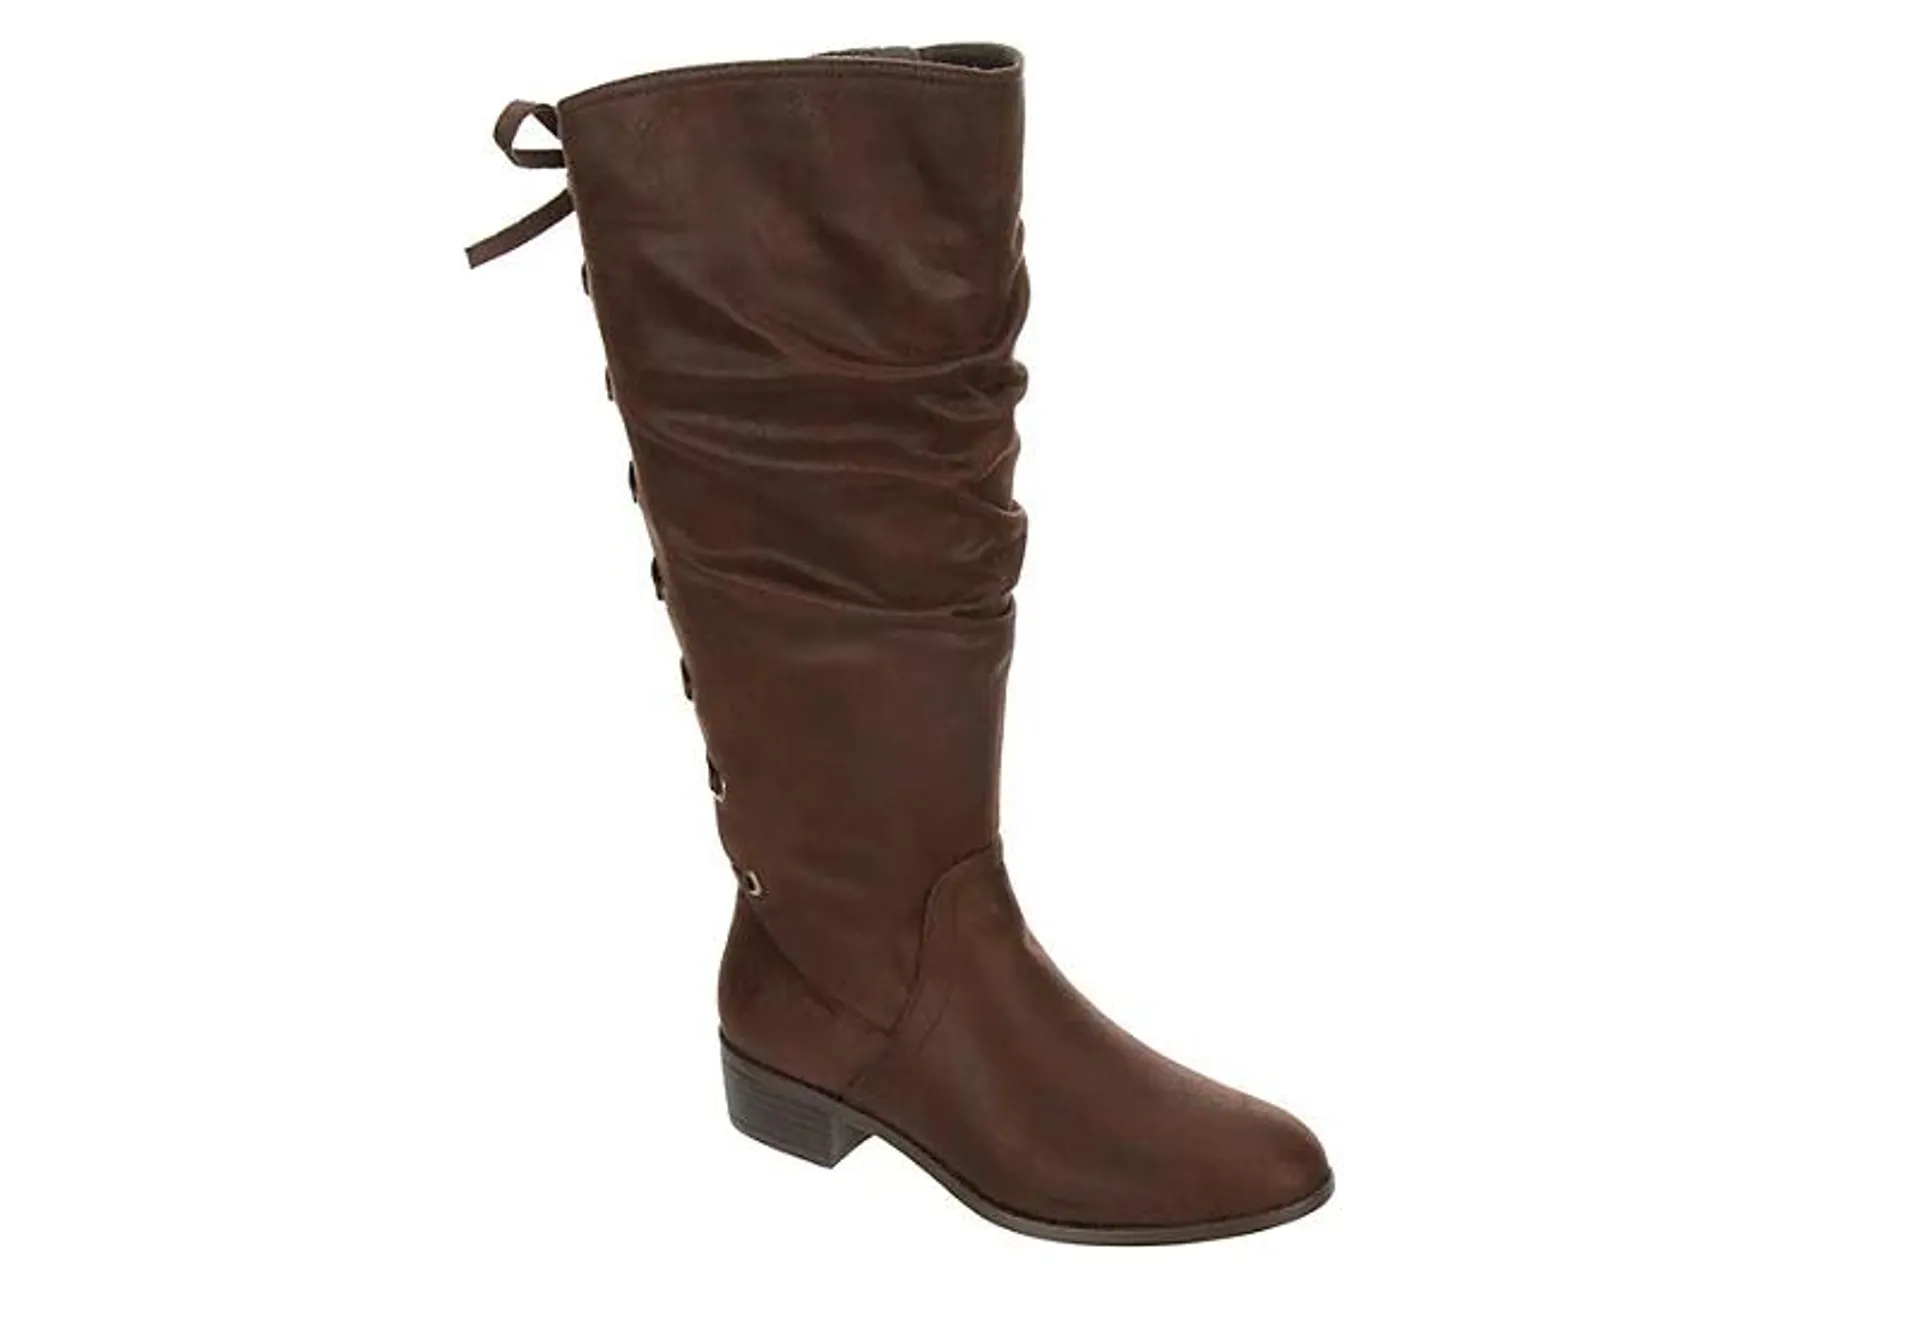 Xappeal Womens Cheyenne Wide Calf Tall Boot - Brown